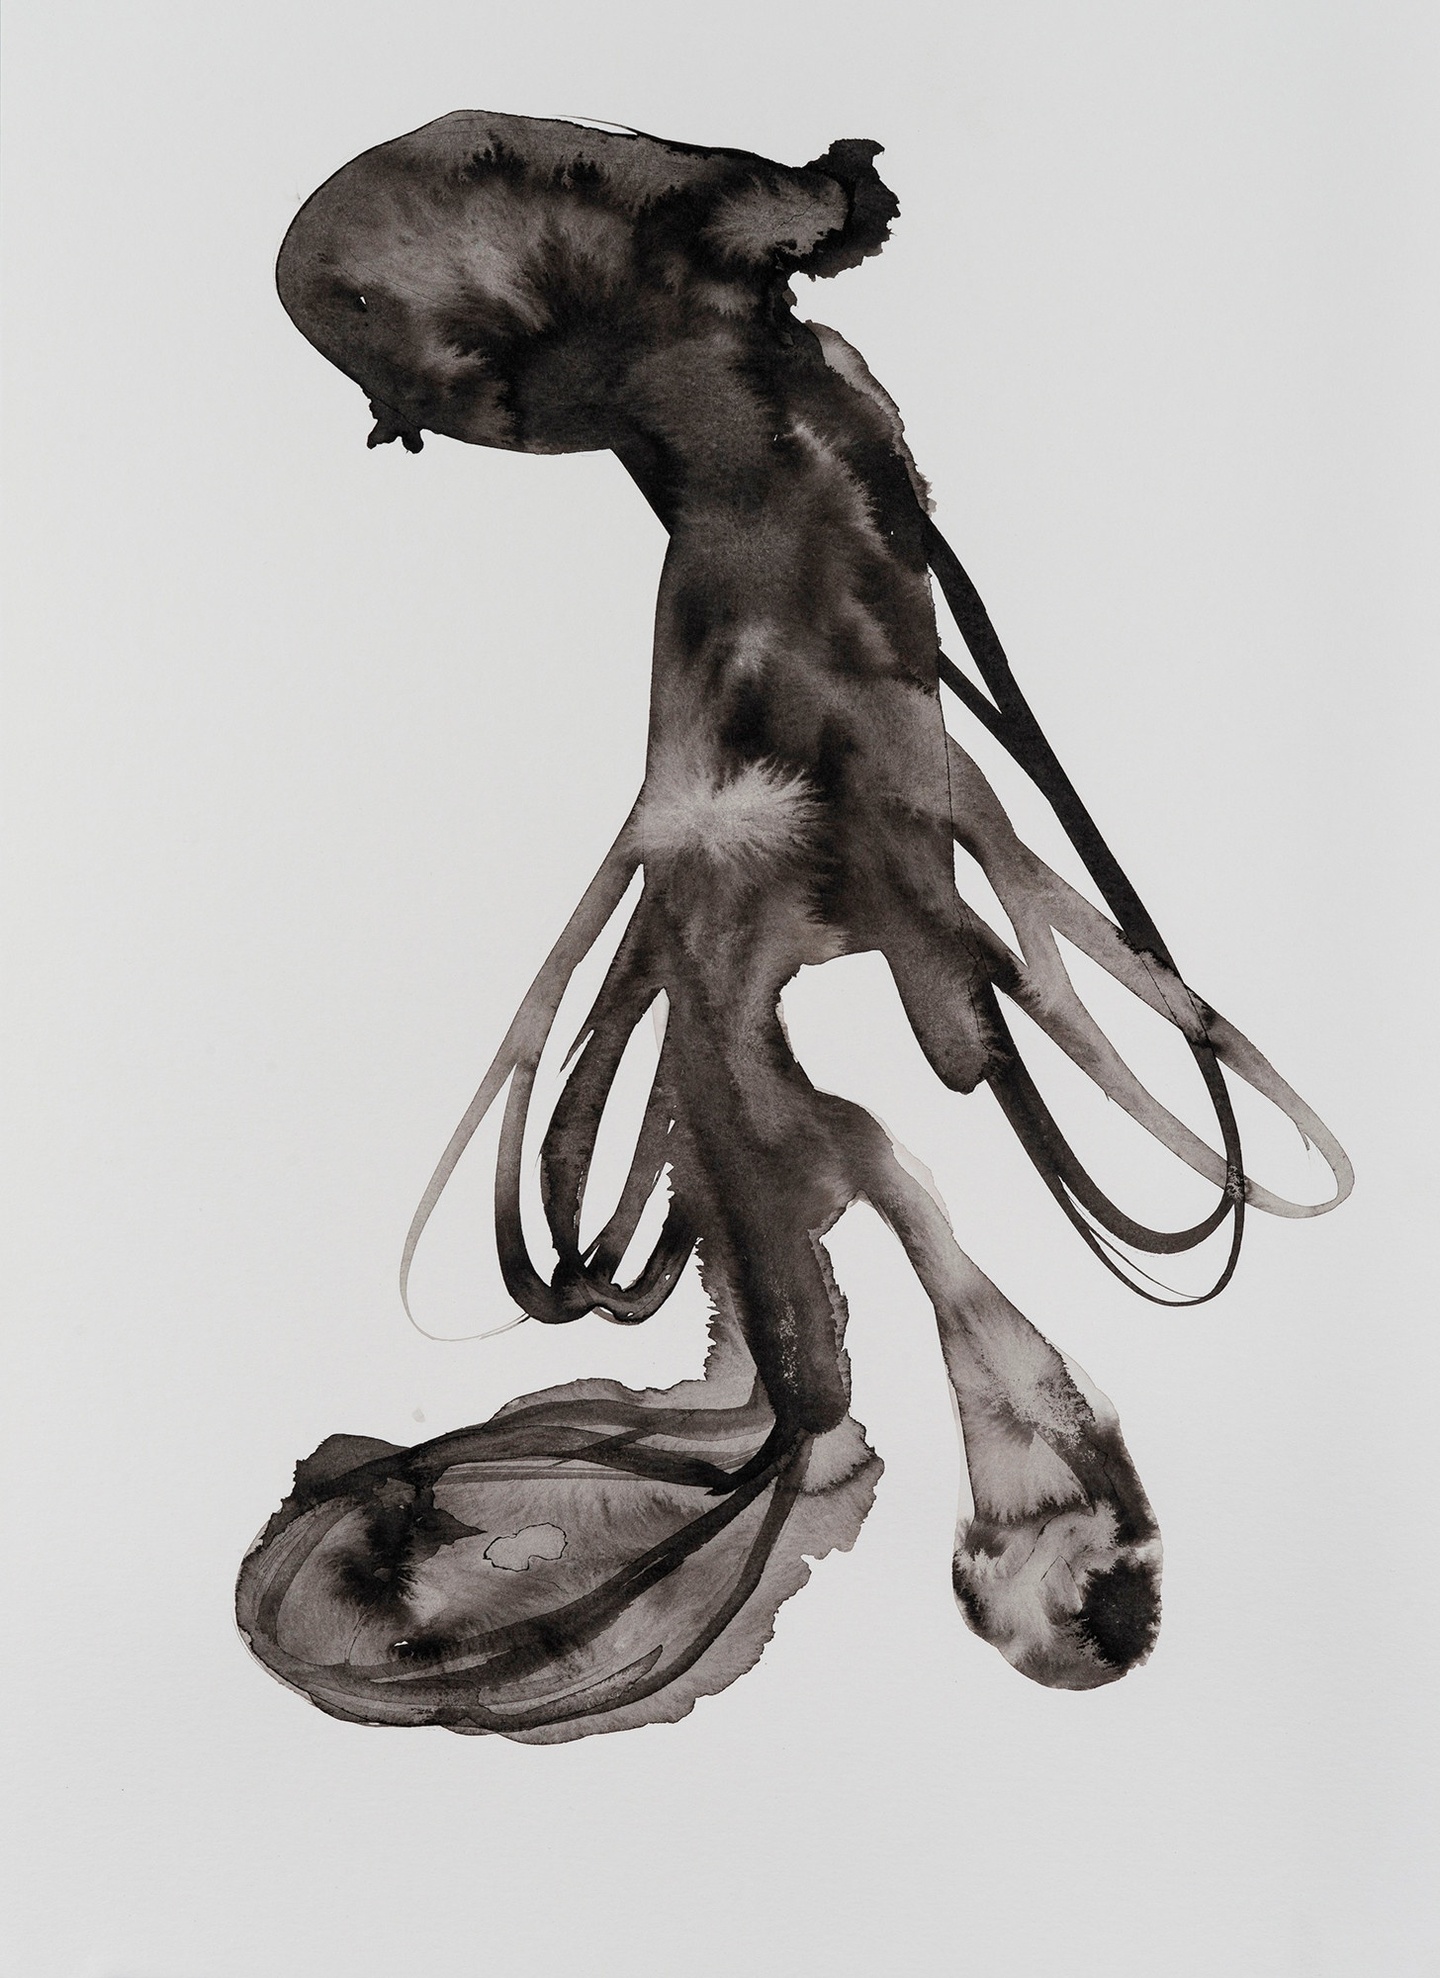 An organic, amorphous form painted in black on paper, with several loops curving outward and back as if wings. The ink gathers in pools across the composition, creating a crisp silhouette.